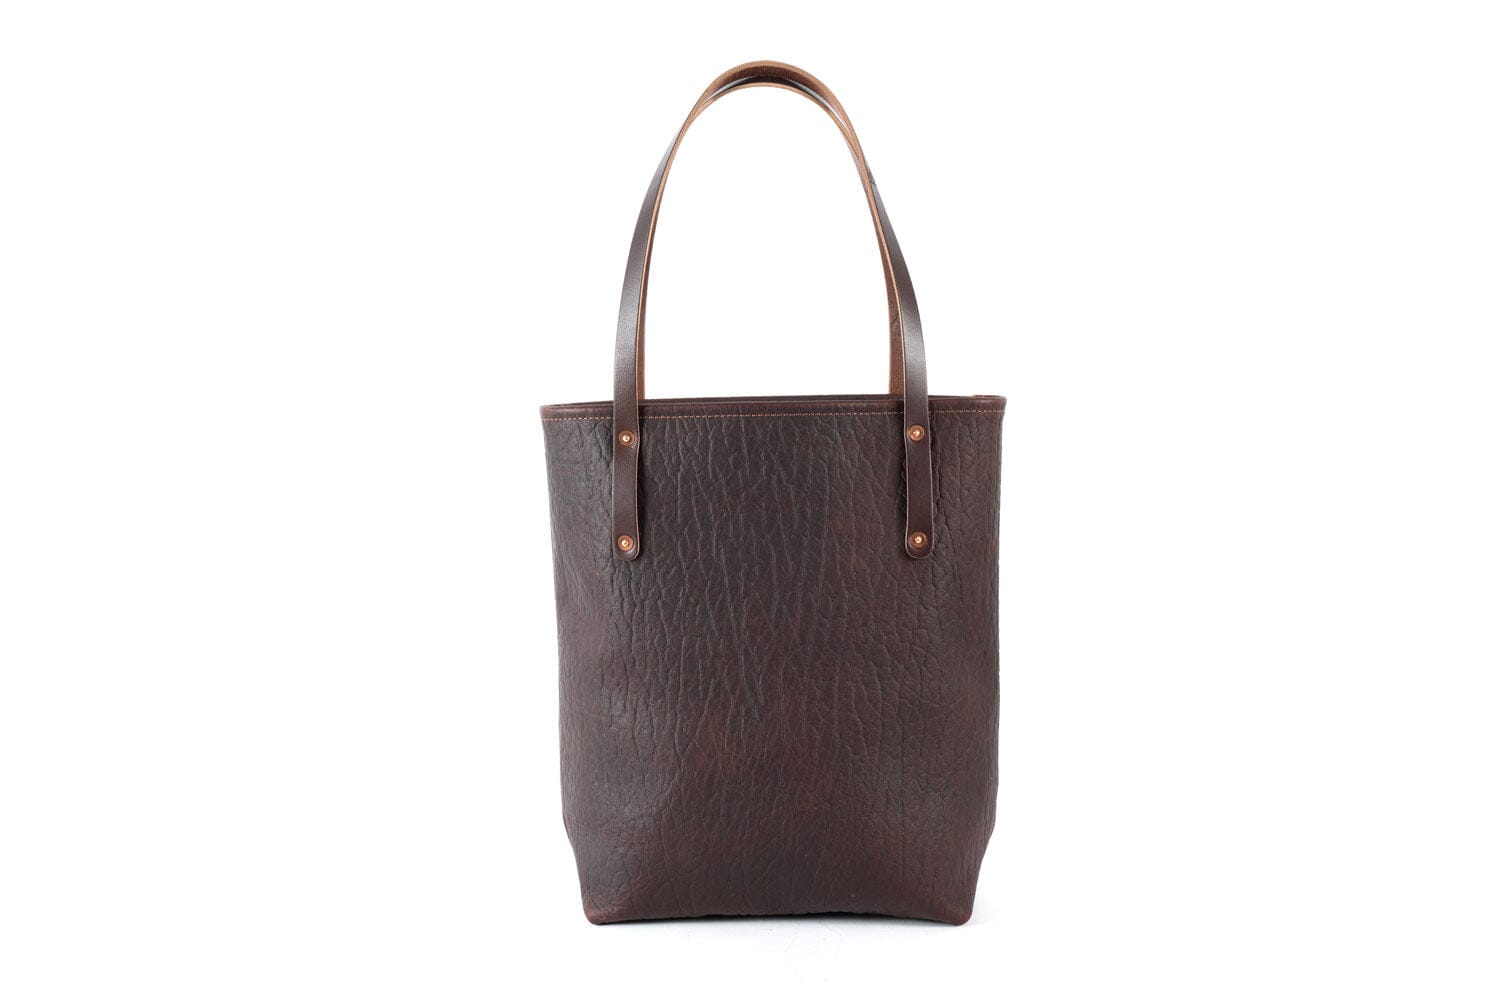 AVERY LEATHER TOTE BAG - SLIM LARGE - CHERRY BISON